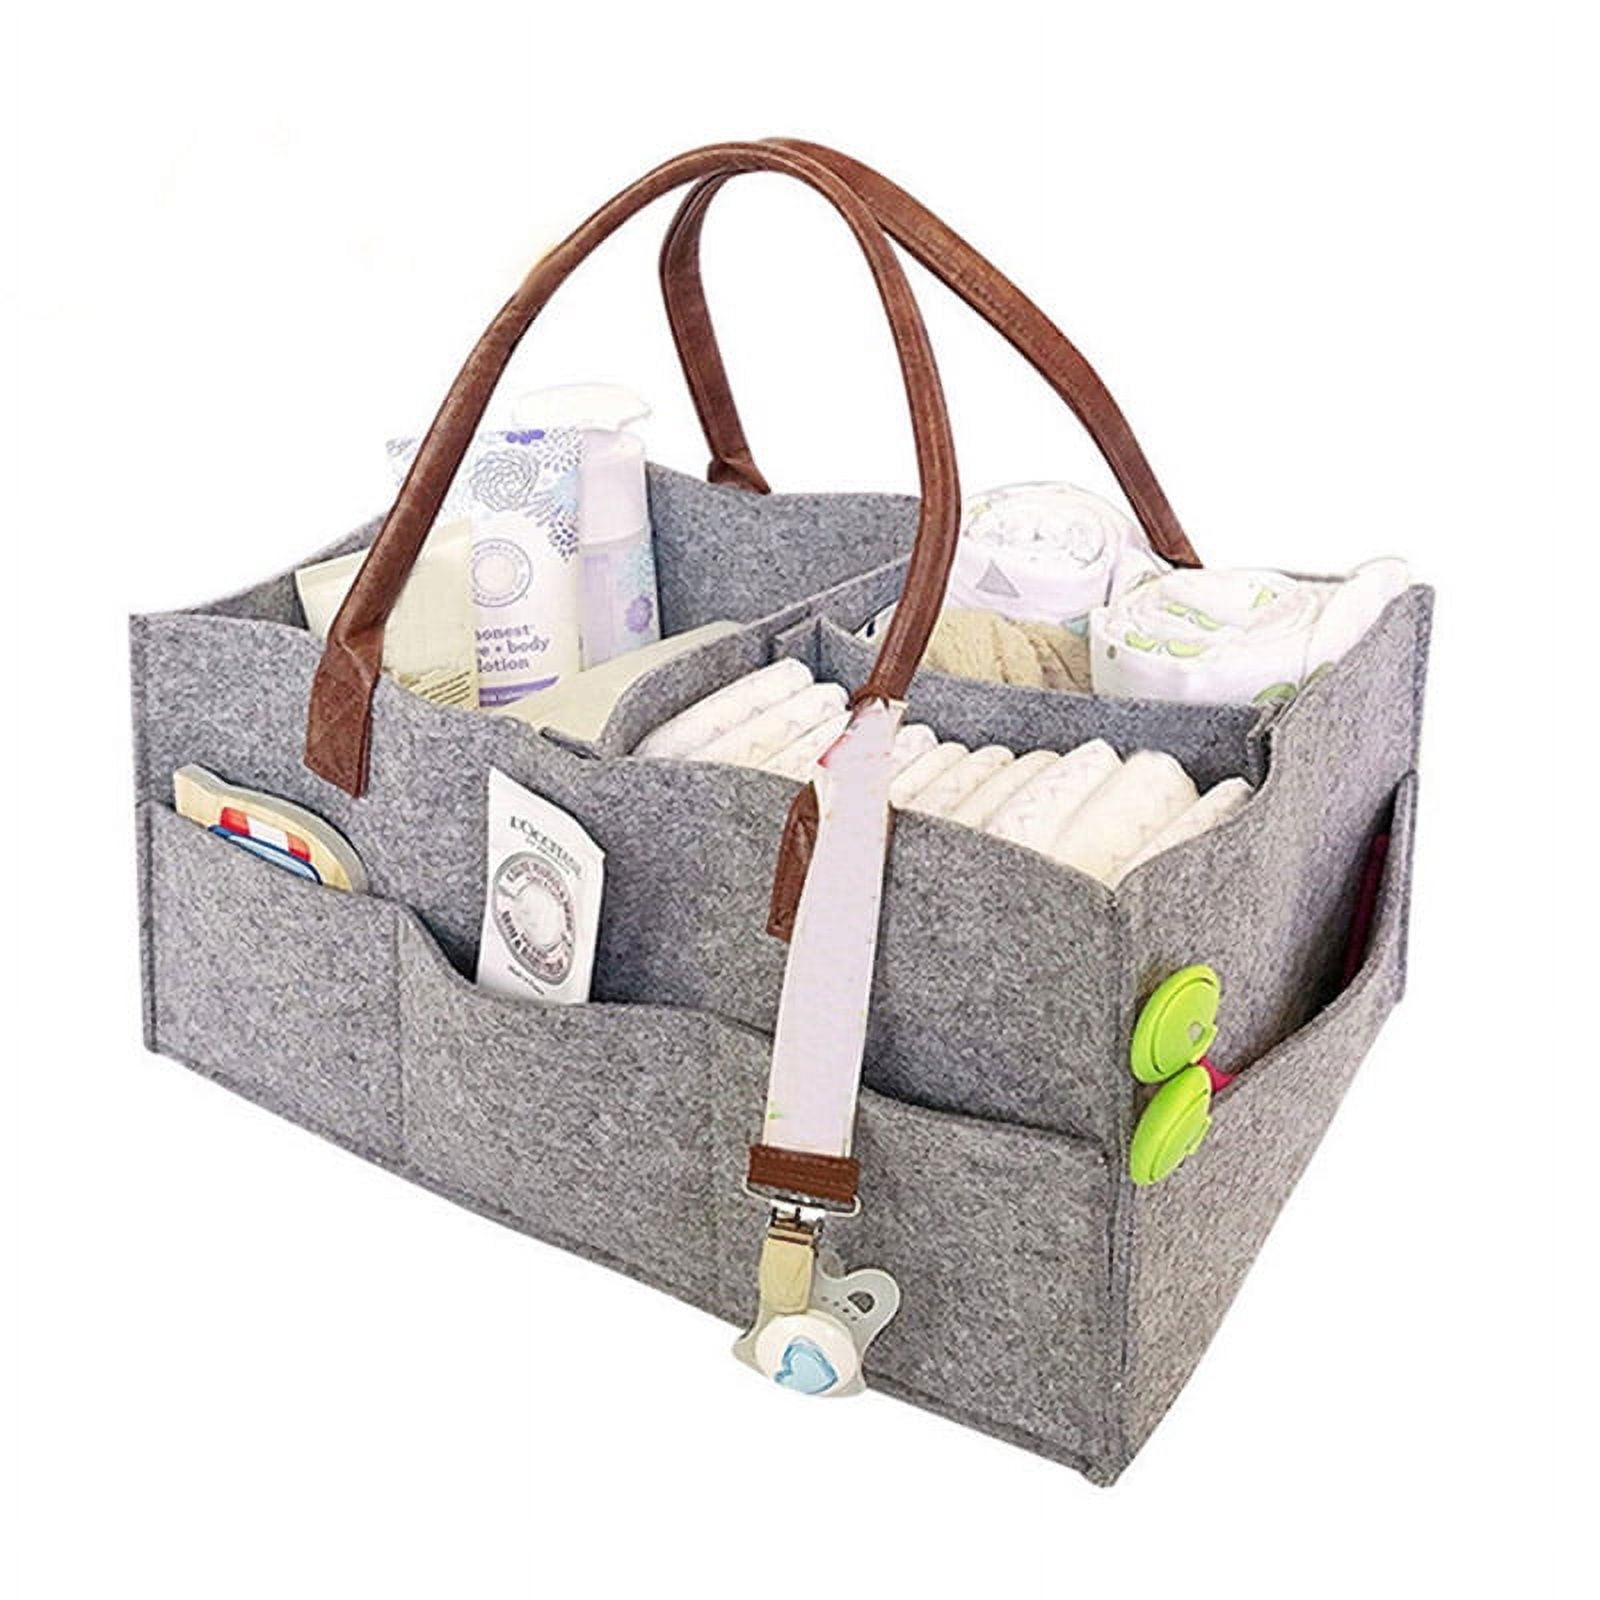 Canvas Diaper Caddy Organizer with Brown Leather Handle + Reviews